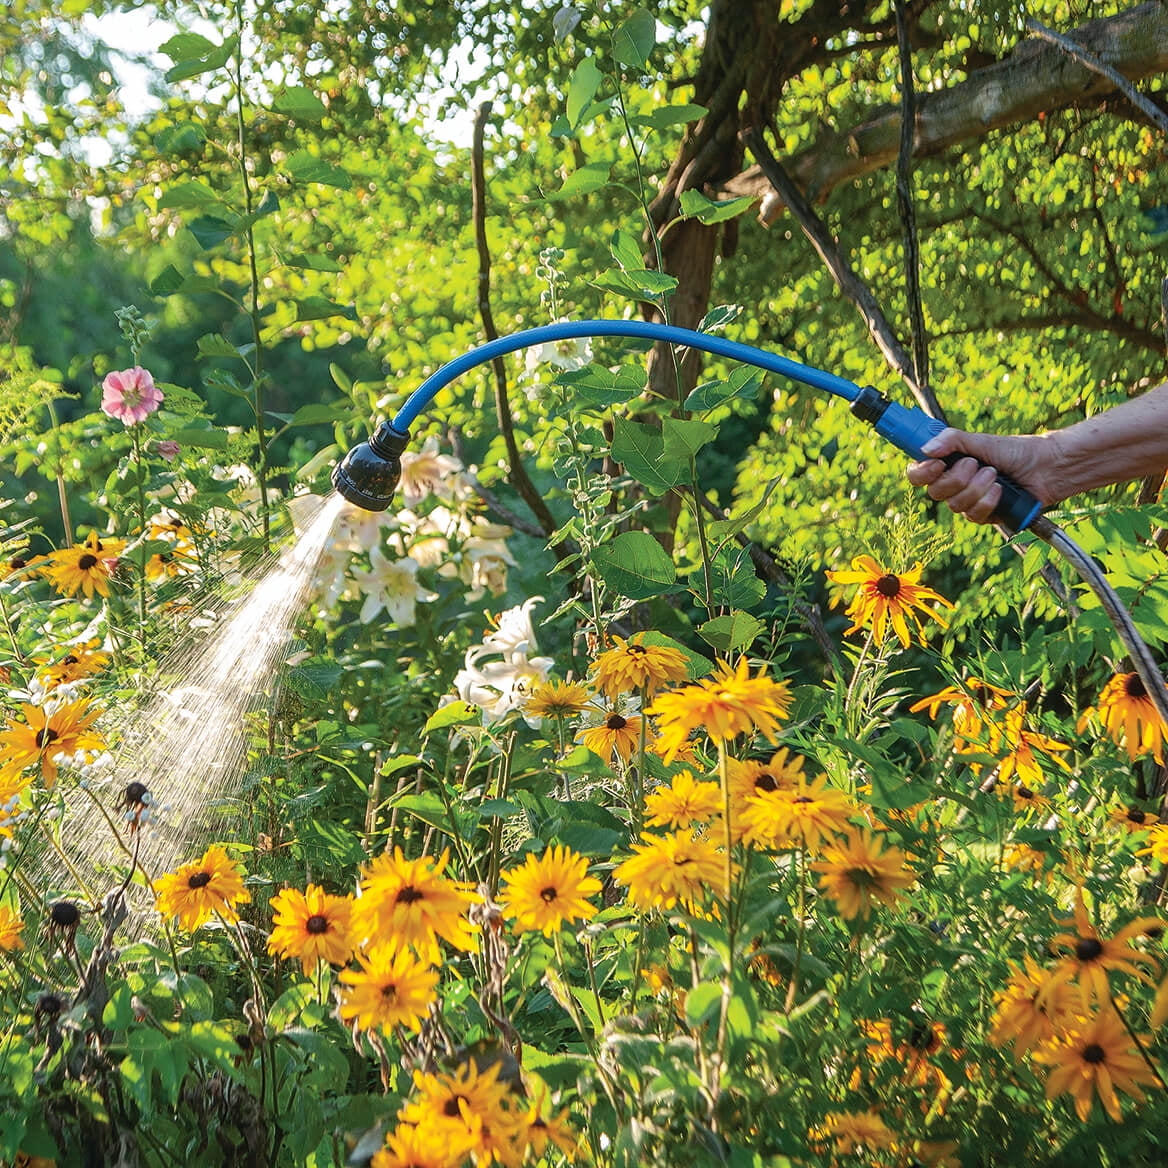 Flexible Watering Wand Sprinkler, Features 9 Different Spray Patterns, Made  of Durable Plastic - Measures 29 1/2